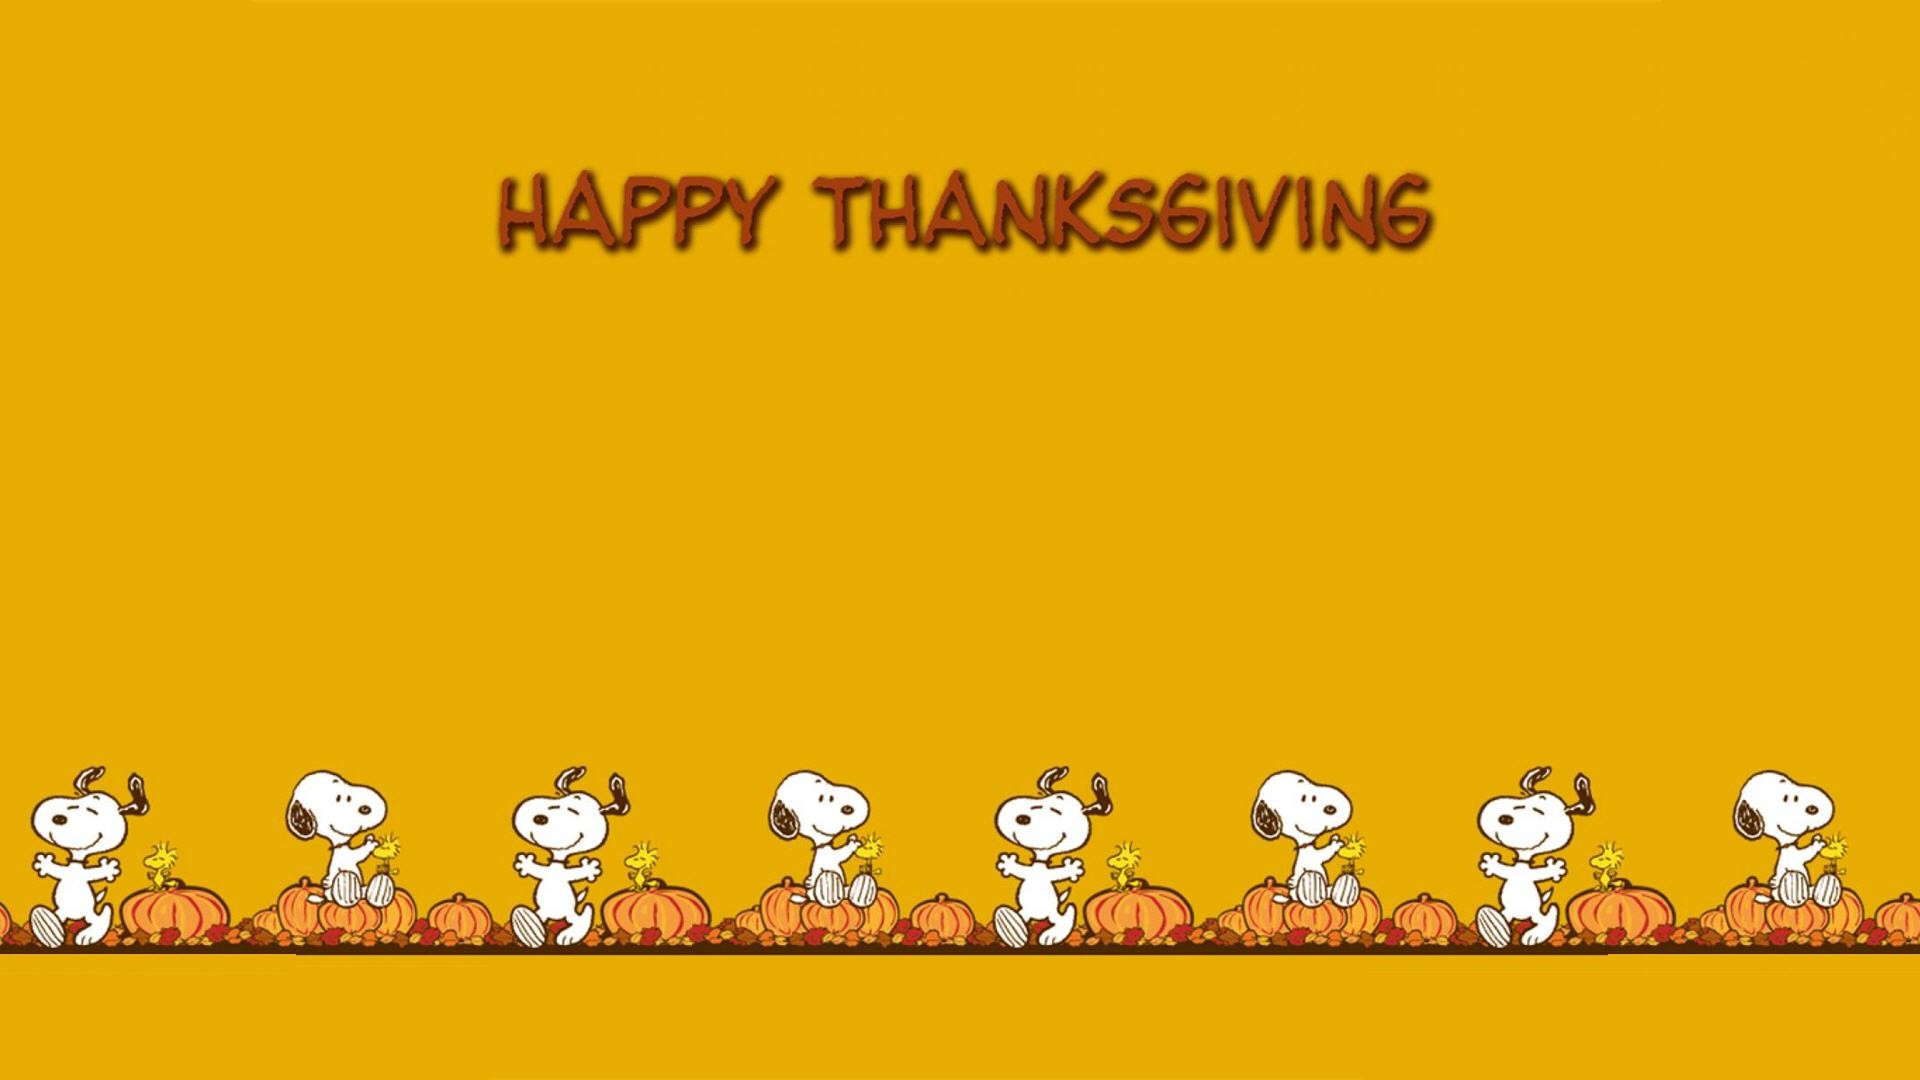 1920x1080 Snoopy Thanksgiving Wallpaper Backgrounds Widescreen